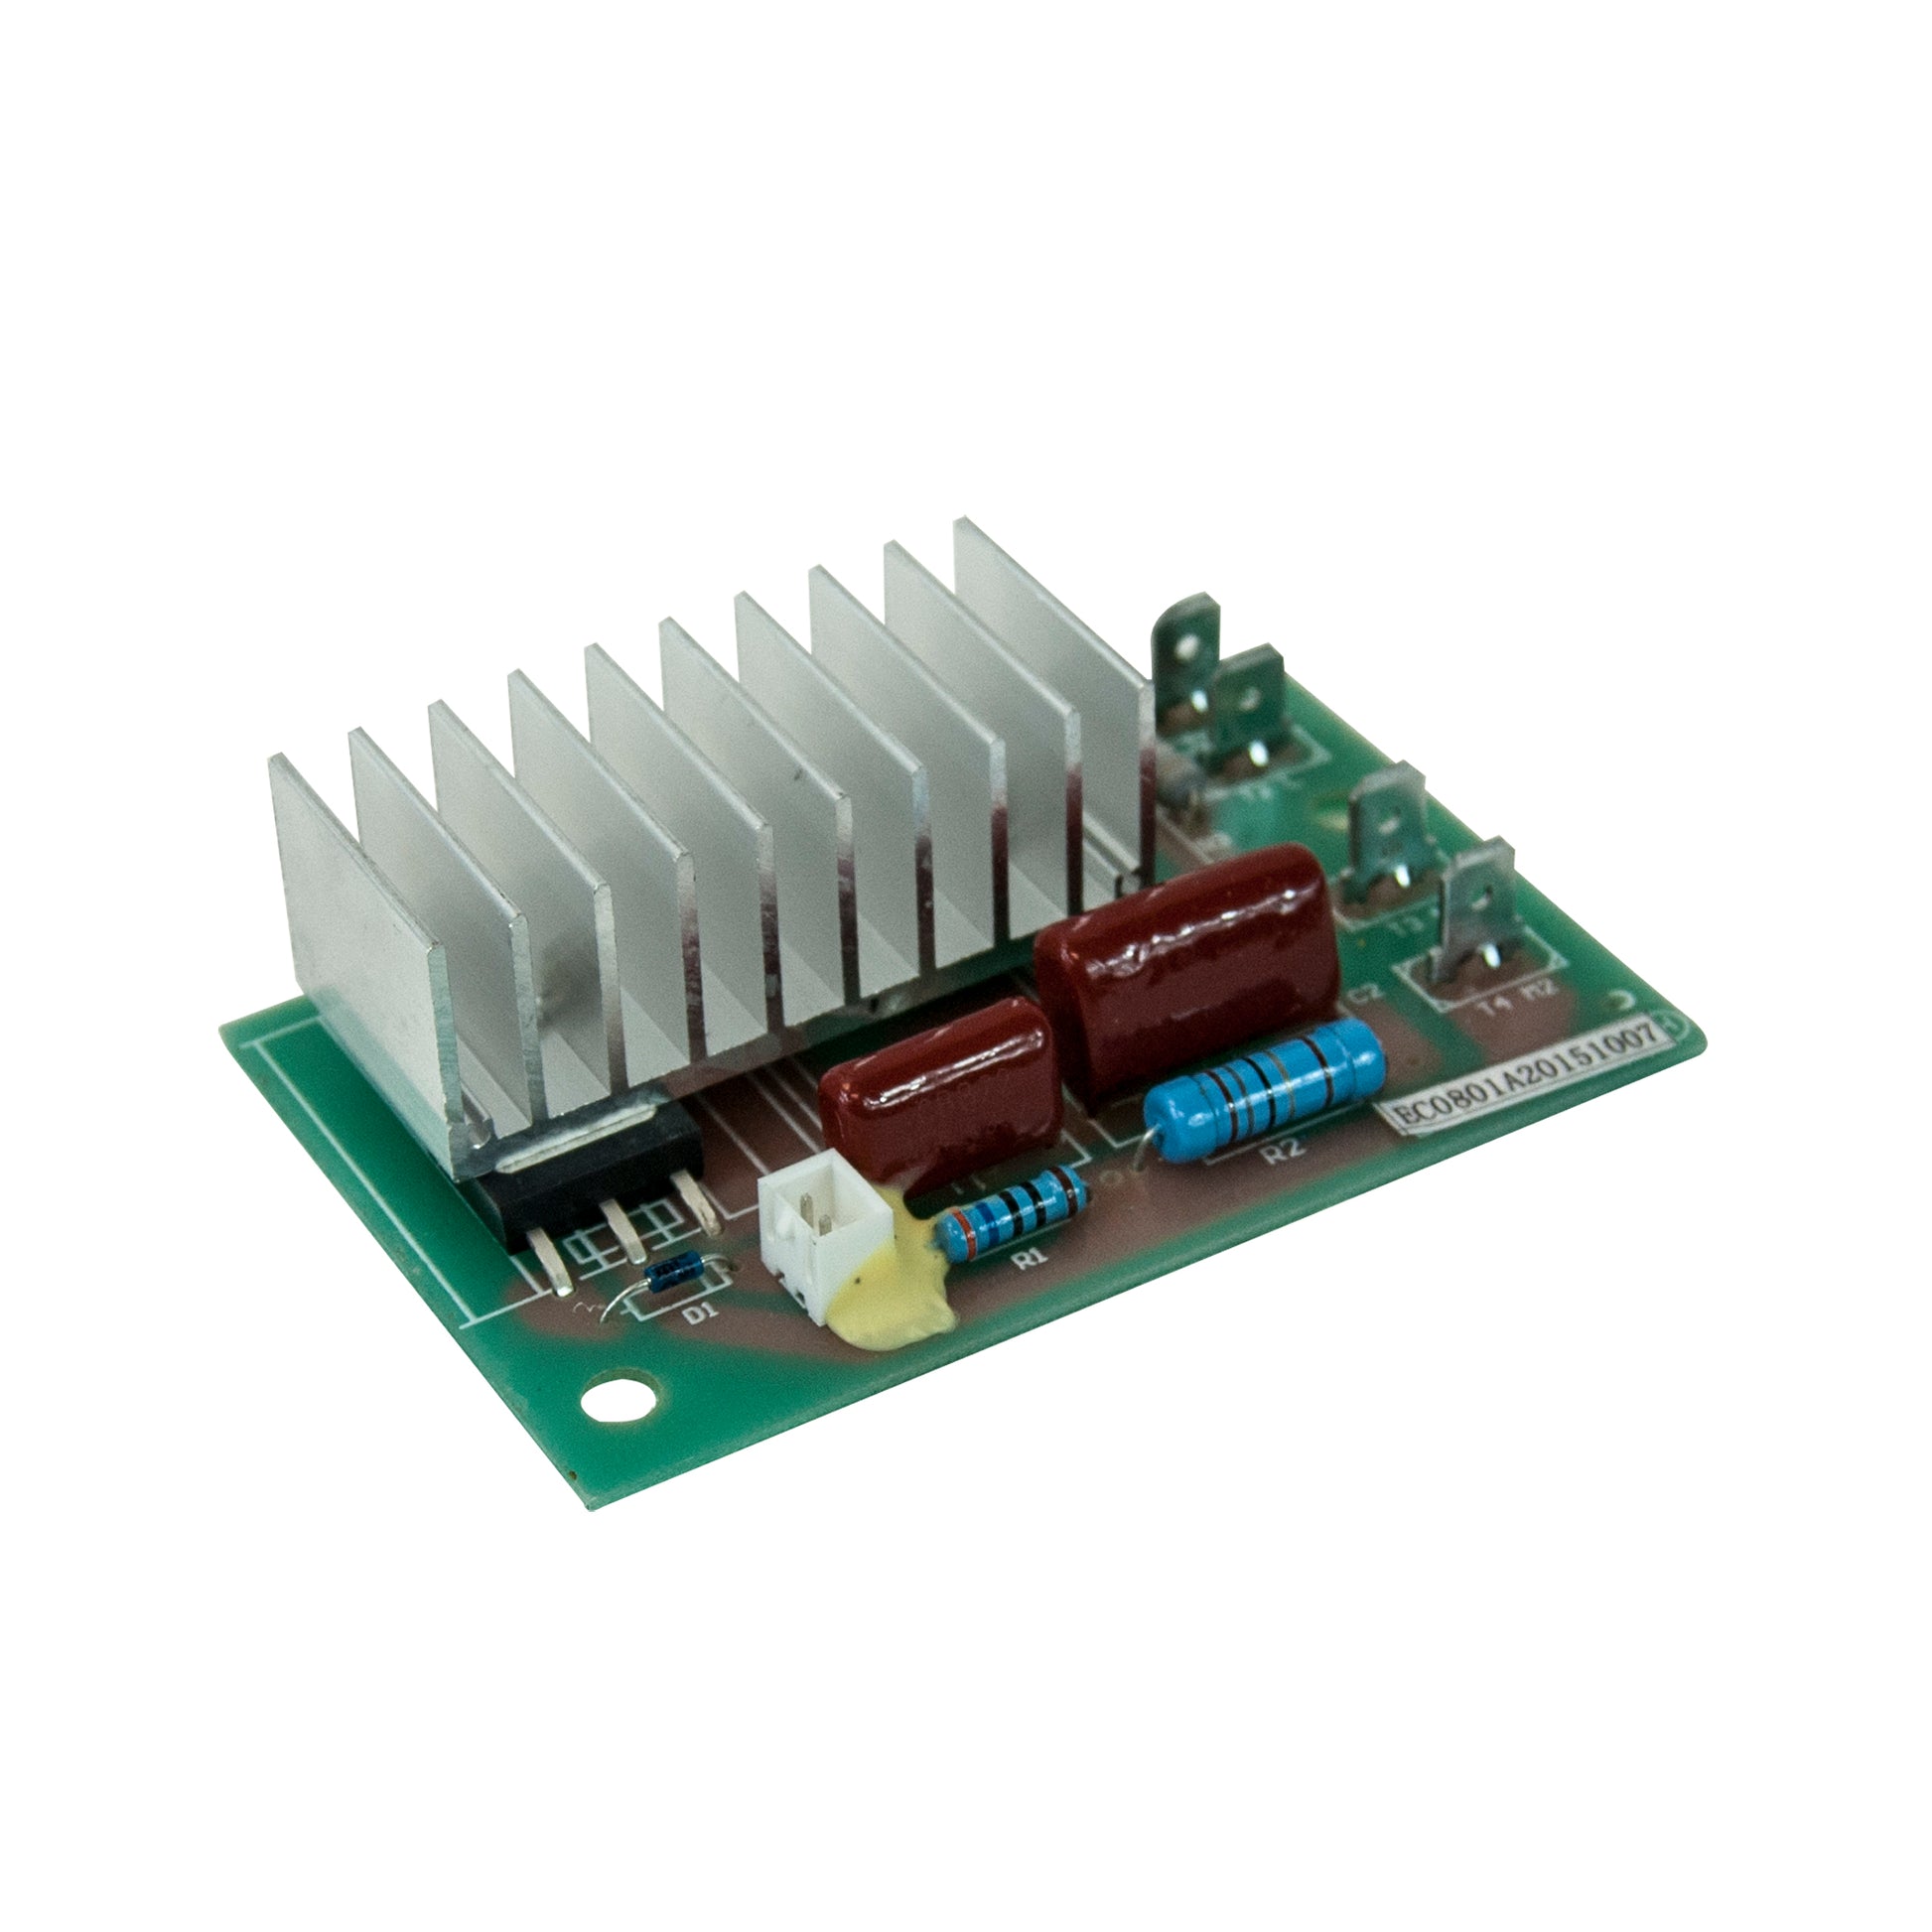 Control Circuit Board for X-12 Confined Space Fan